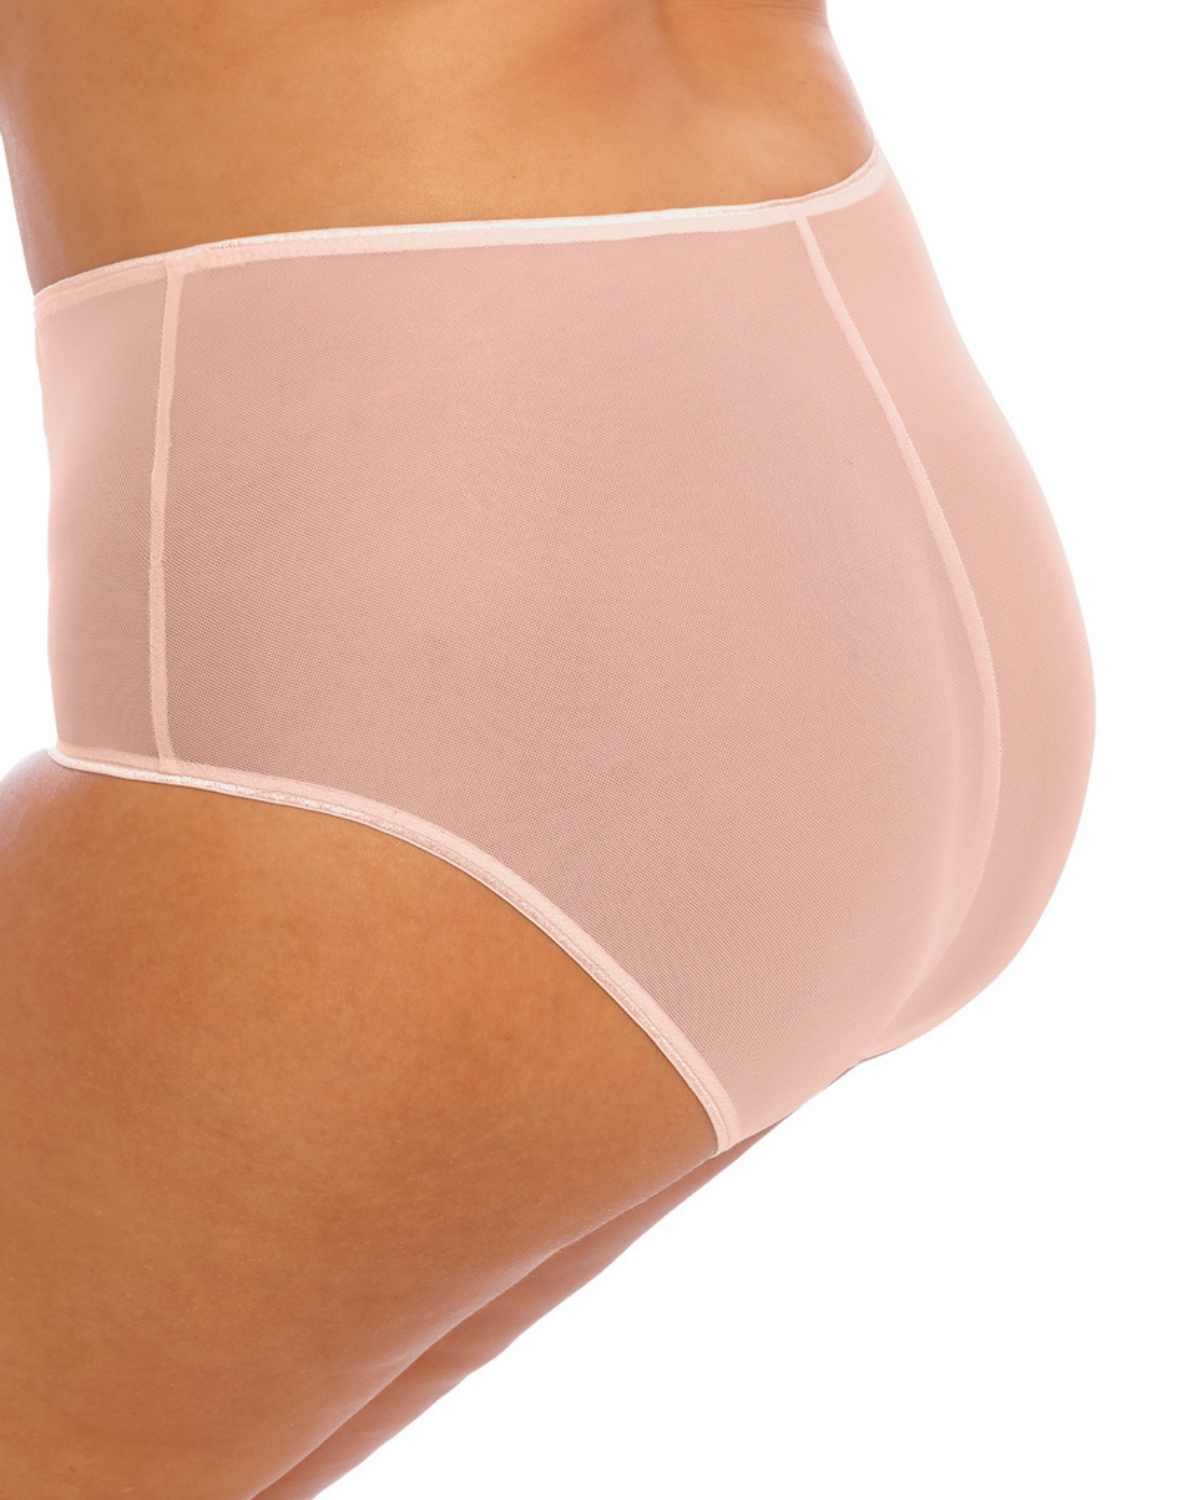 Model wearing a full brief panty in light pink